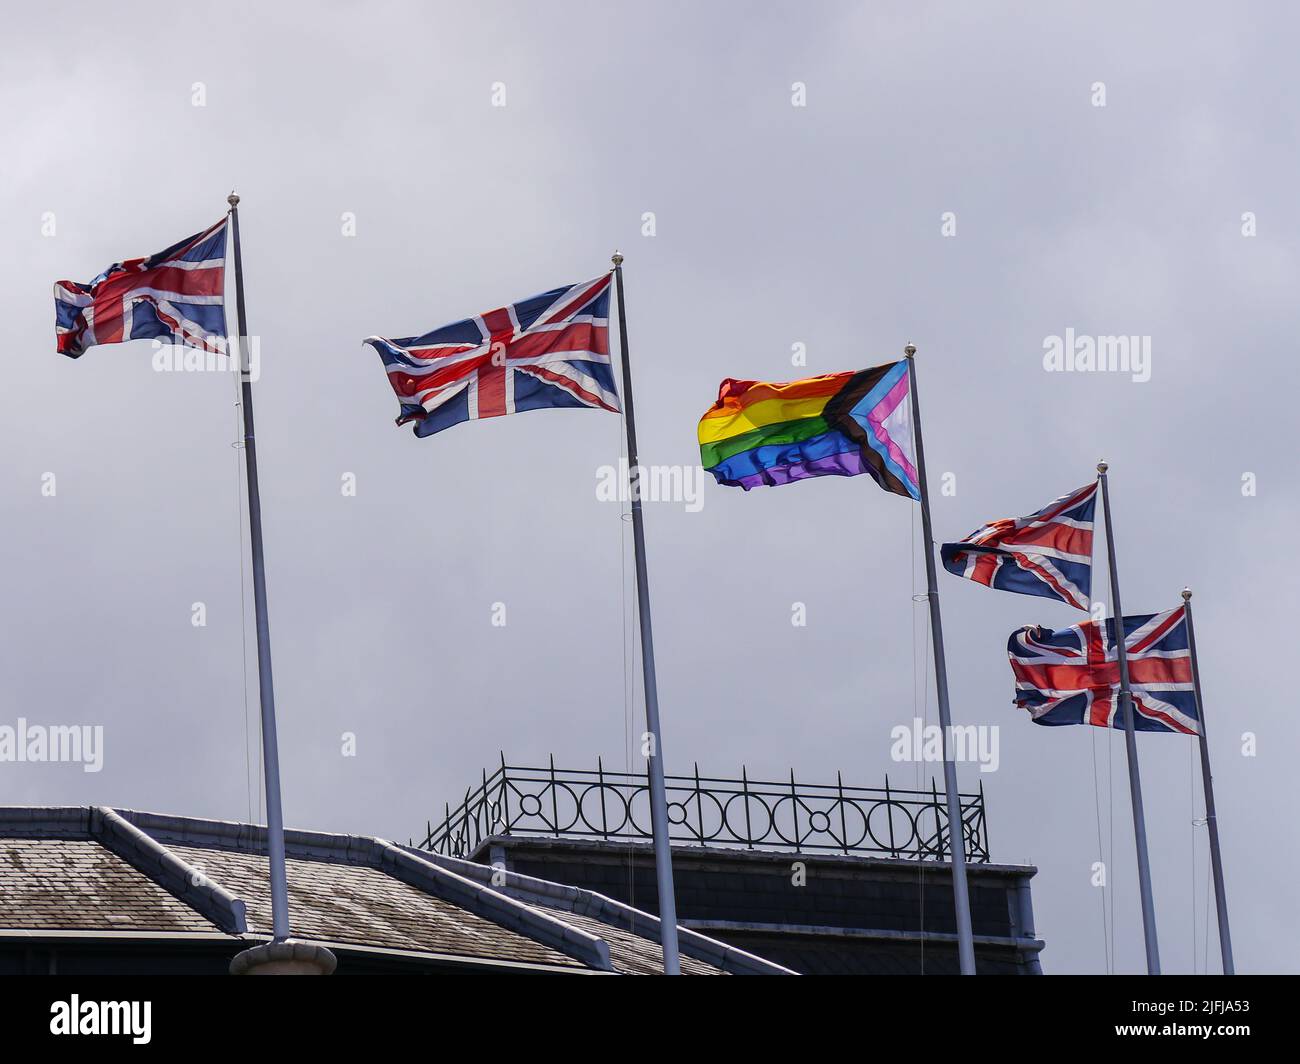 The LGBTQ flag flies between two union flags  on flagpoles Stock Photo